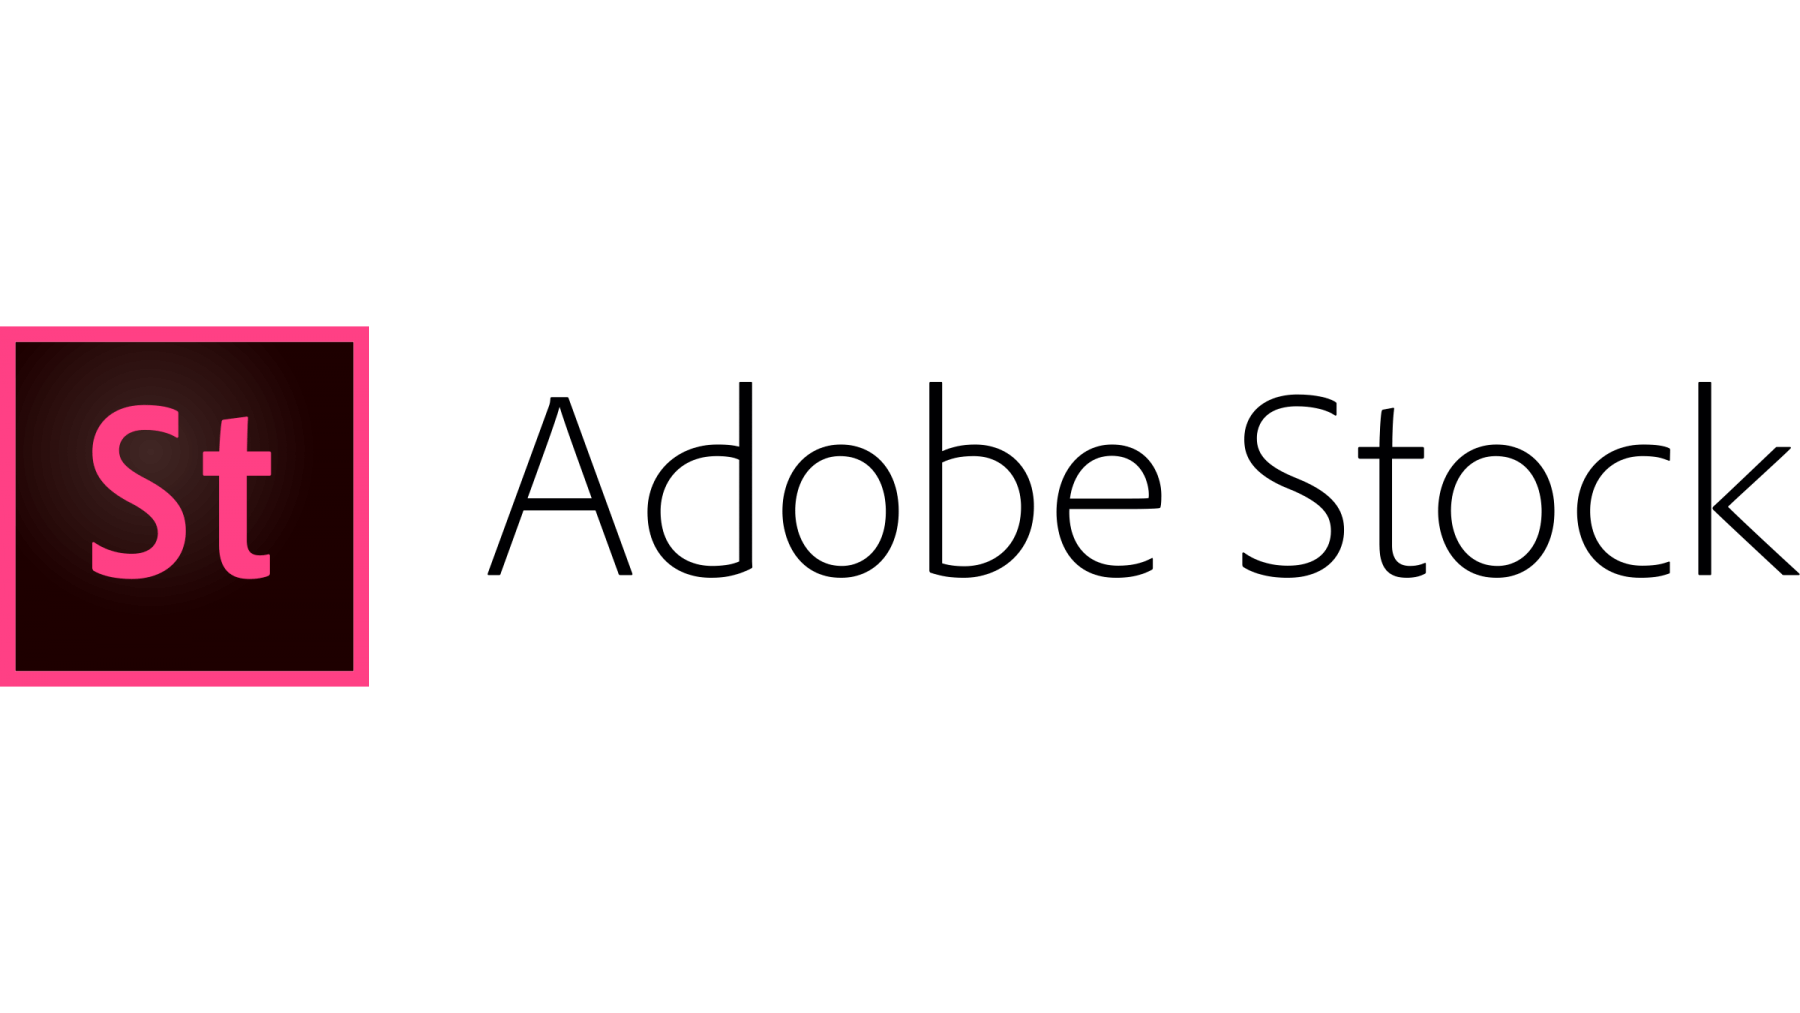 New Adobe Logo - New Adobe Stock Features Coming This Year | Creative Cloud blog by Adobe